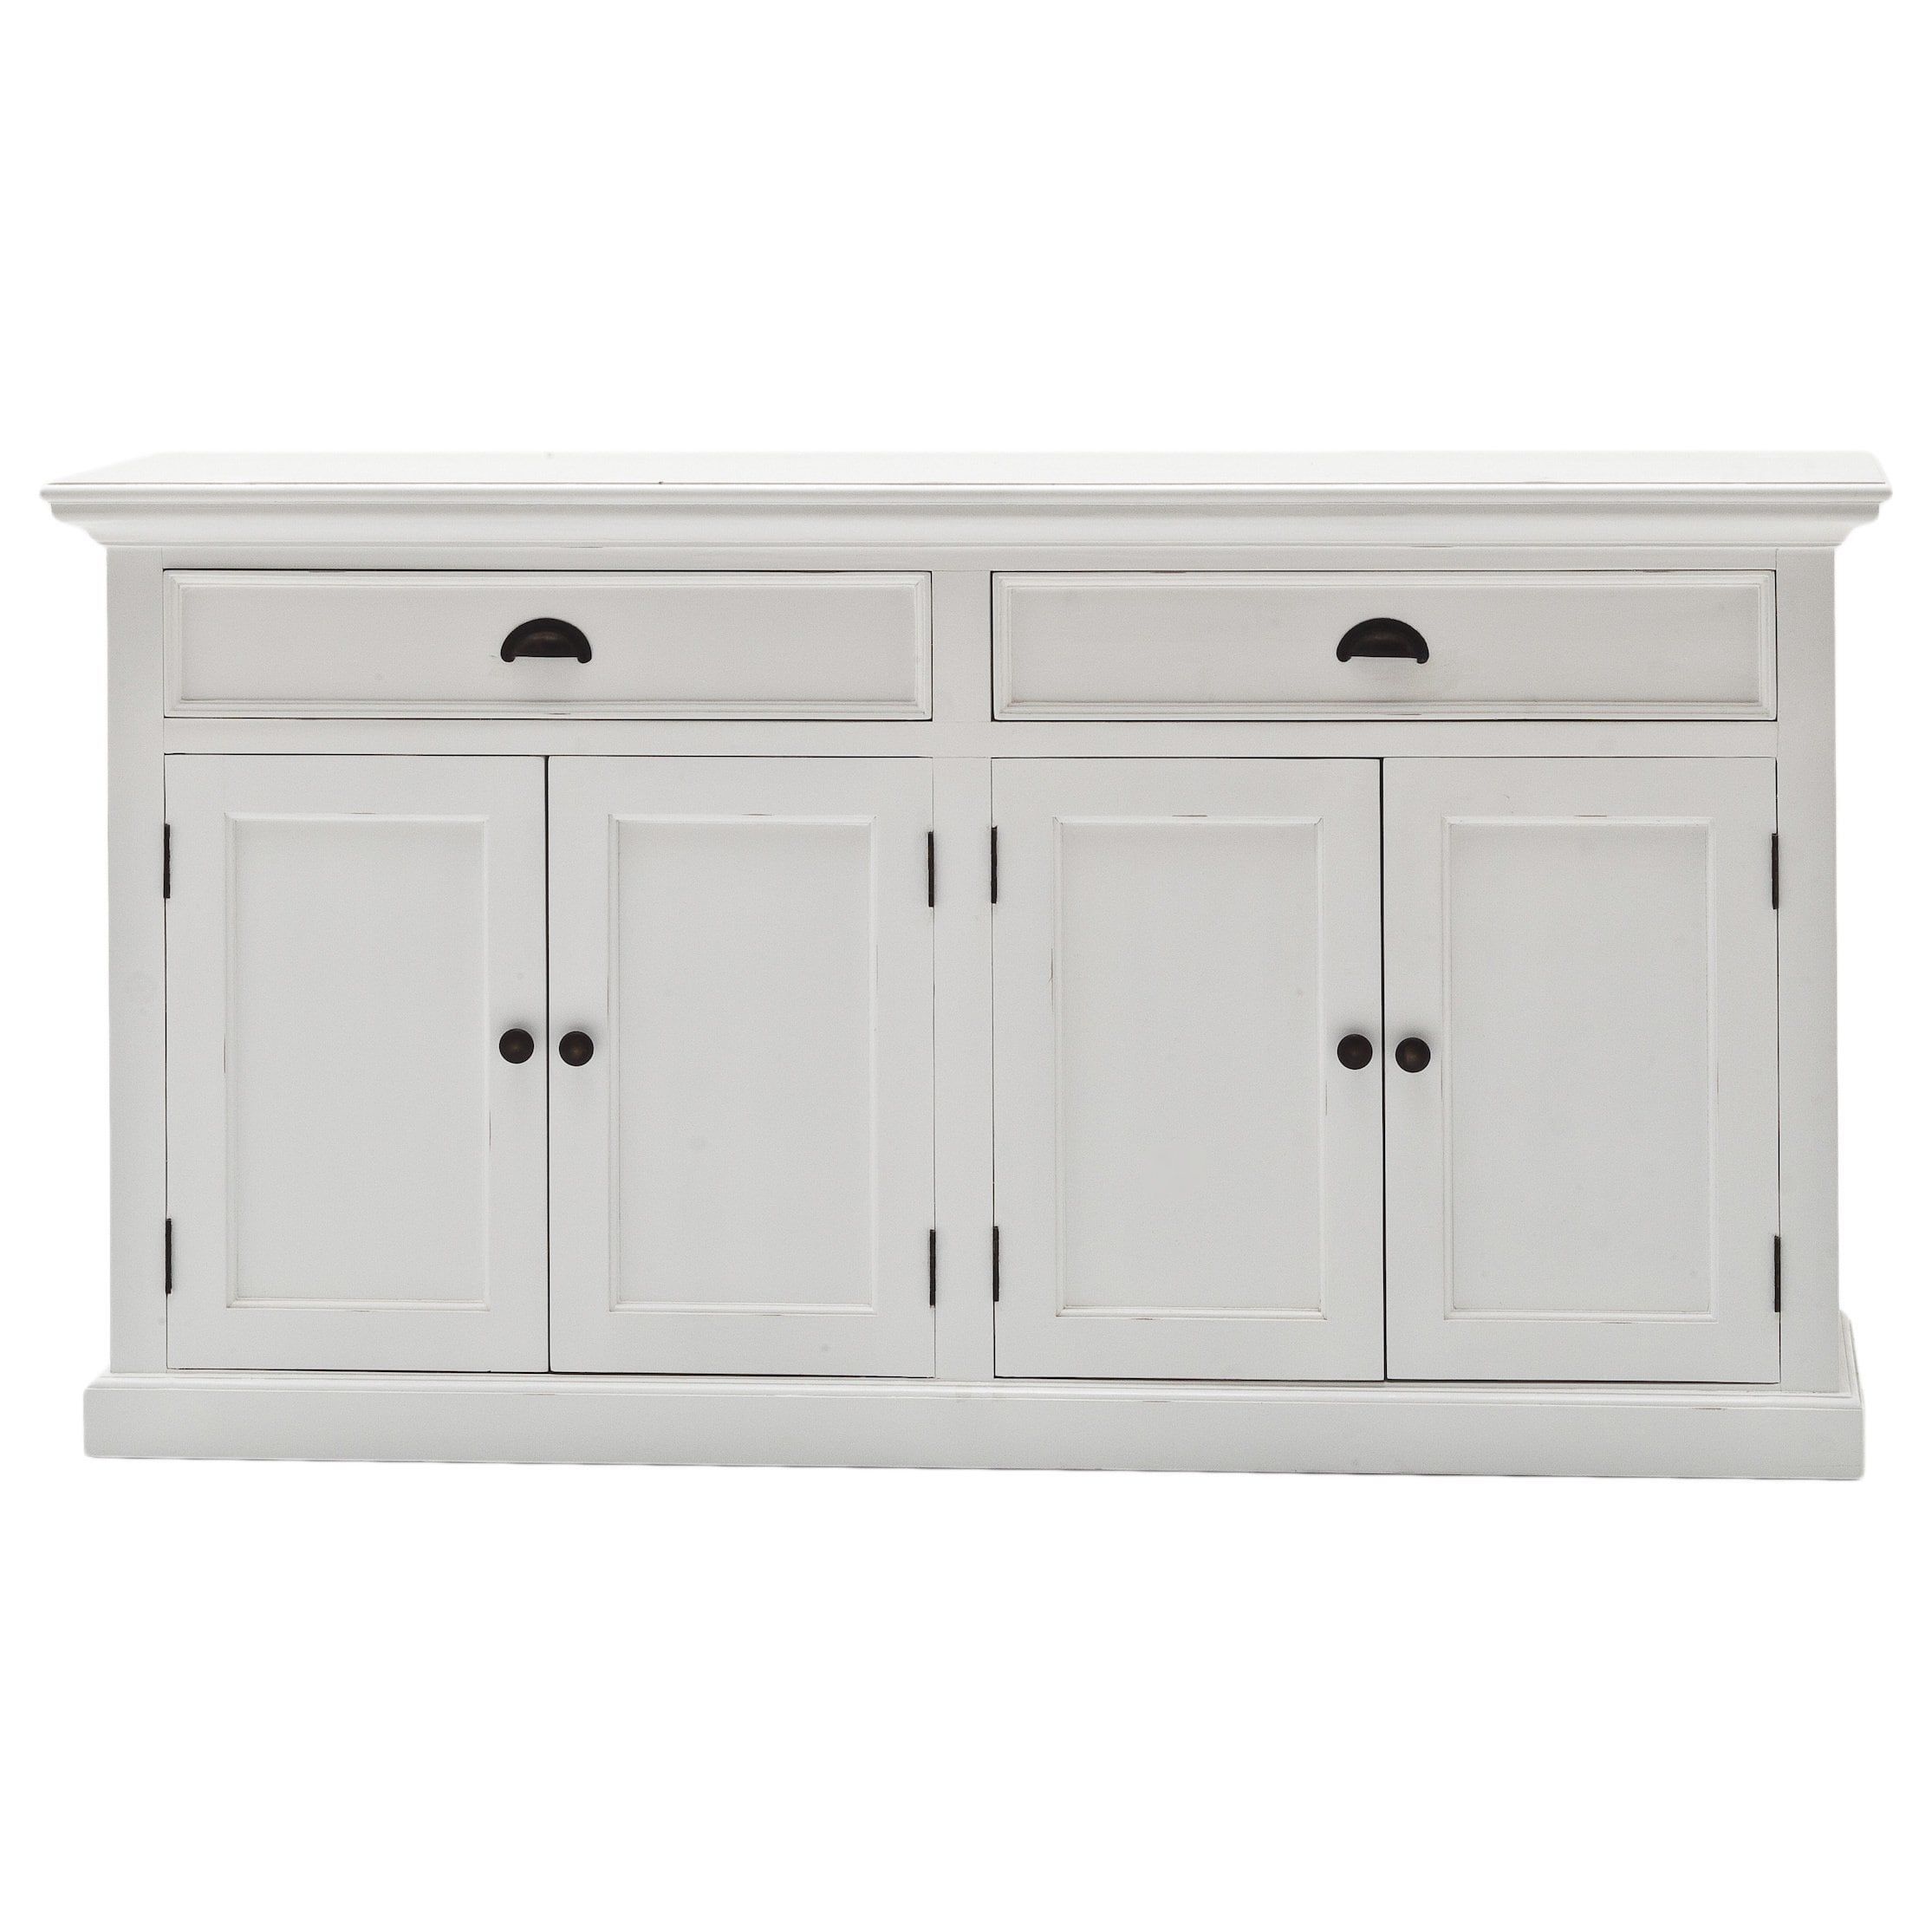 The Gray Barn Lands Deerpark White Mahogany Wood Classic For Amityville Wood Sideboards (View 10 of 30)